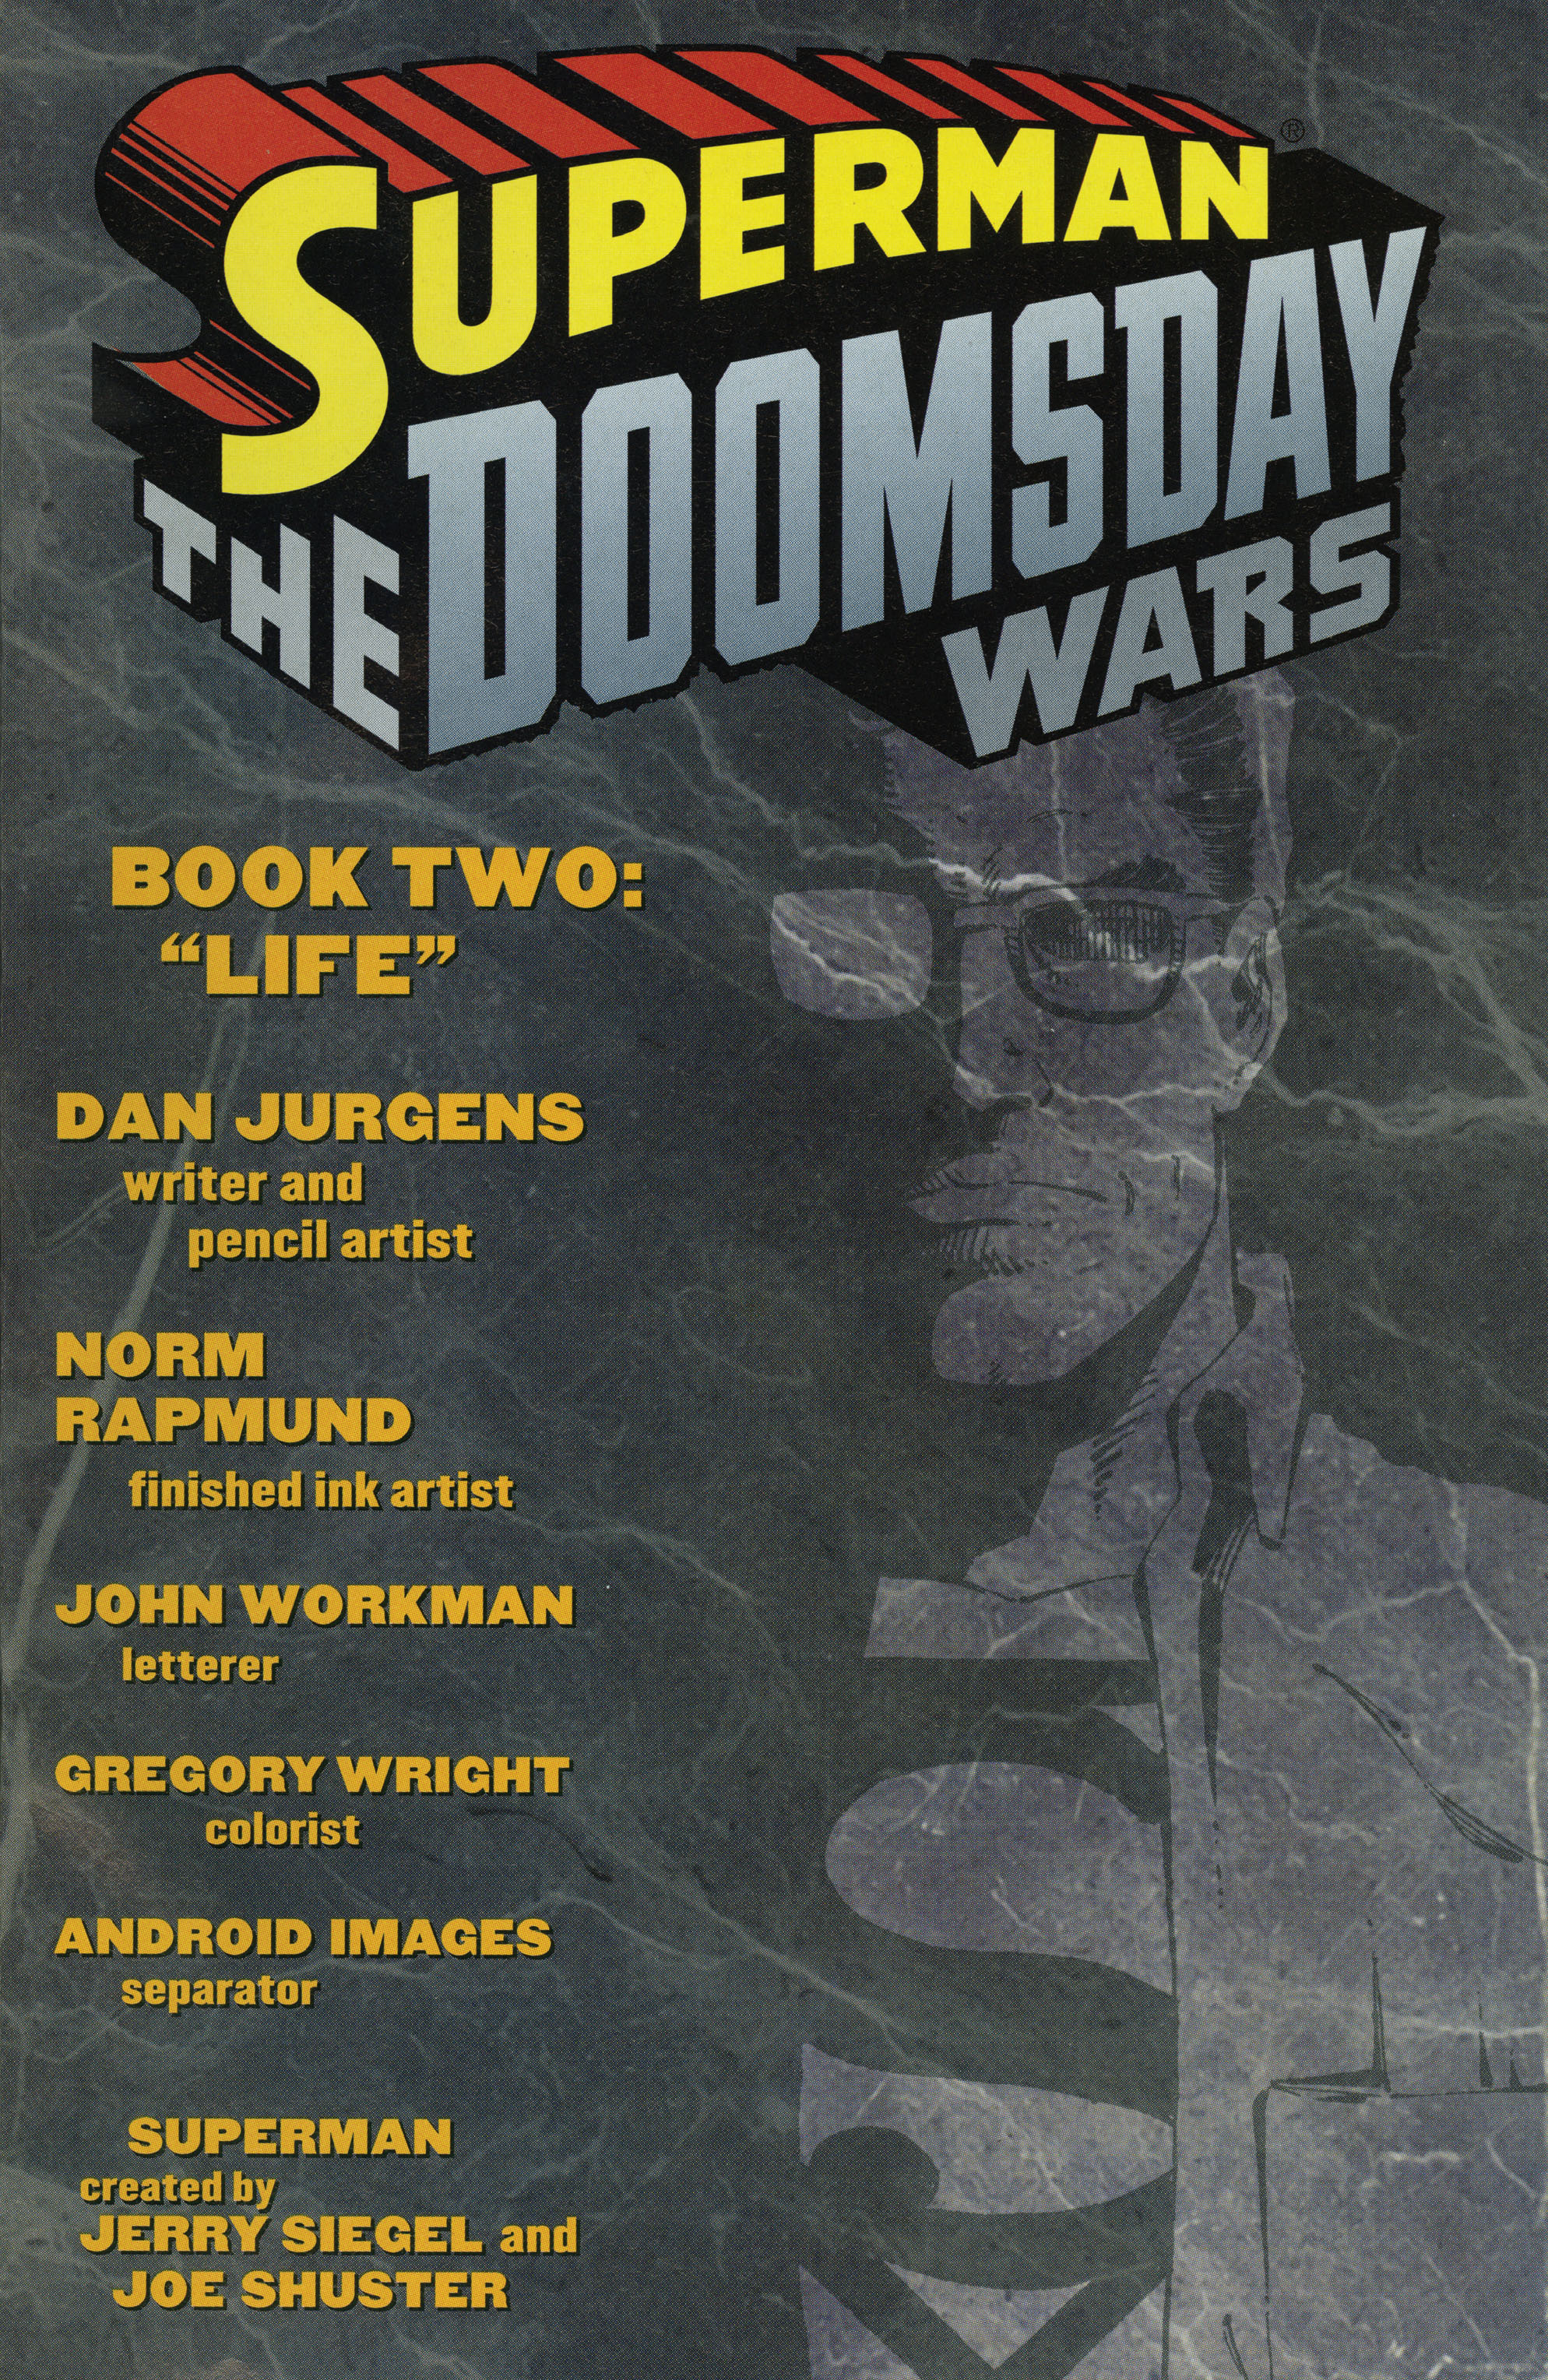 Read online Superman: The Doomsday Wars comic -  Issue #2 - 2